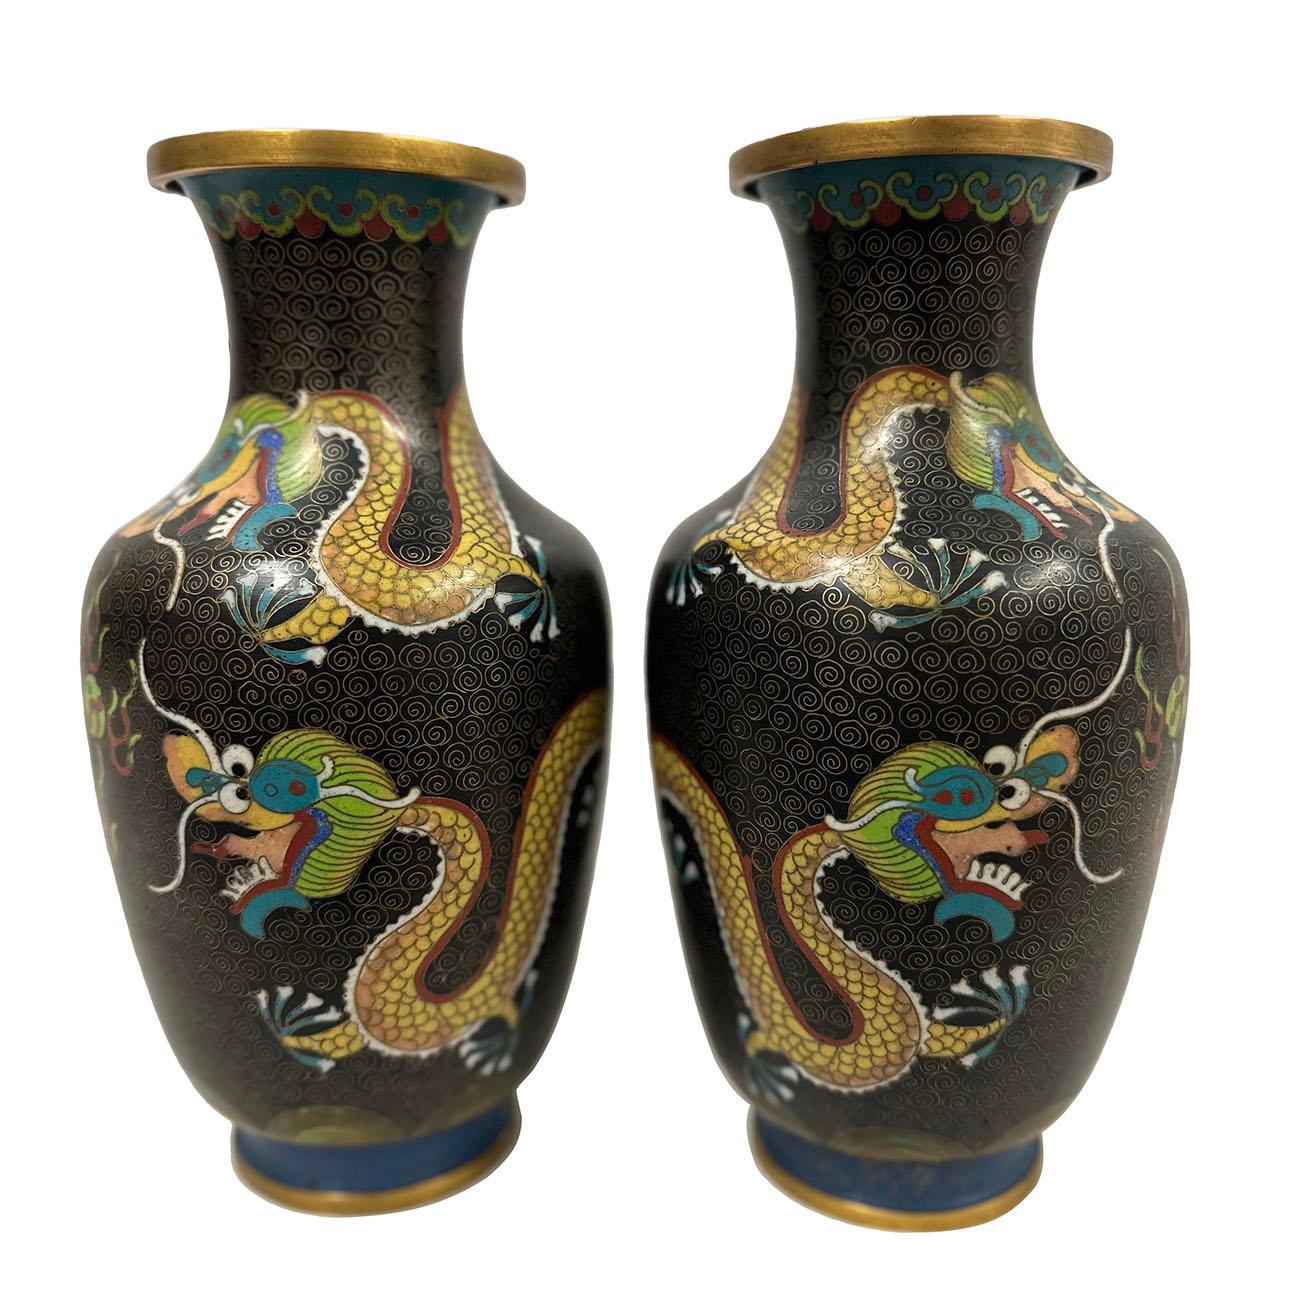 This Pair of magnificent Chinese Cloisonné Vases are the perfect decor pieces. with beautiful three dragons playing fire ball design, it is a majestically hand crafted work of art that is sure to capture everyone’s attention. Very beautiful. A lot